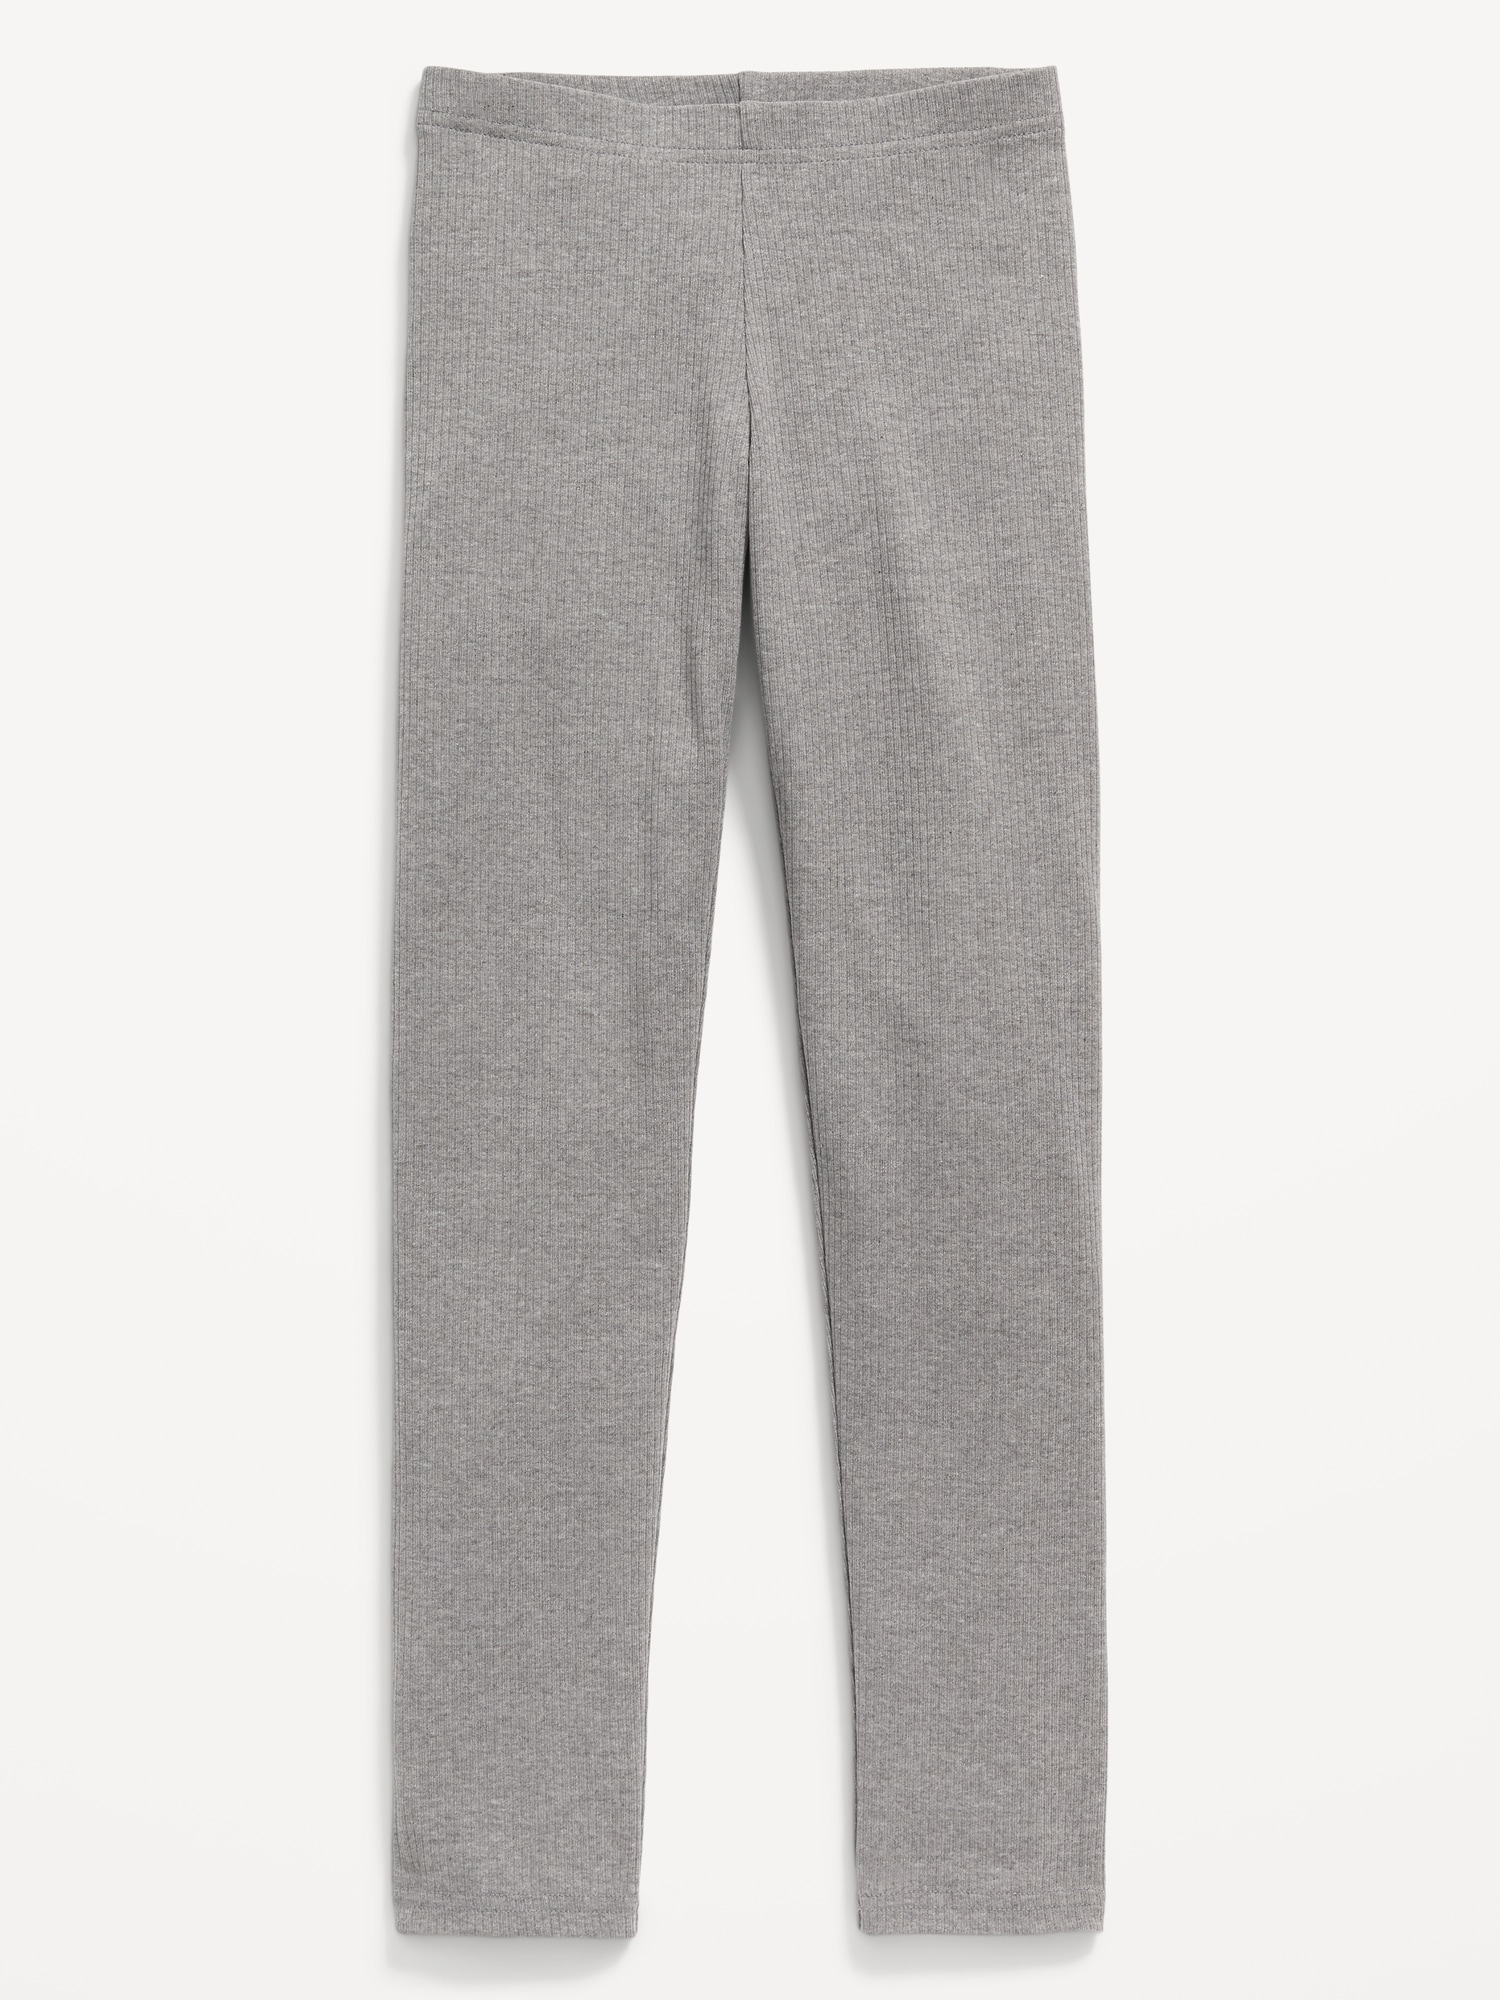 Buy Nelly Soft Rib Fitted Pants - Grey